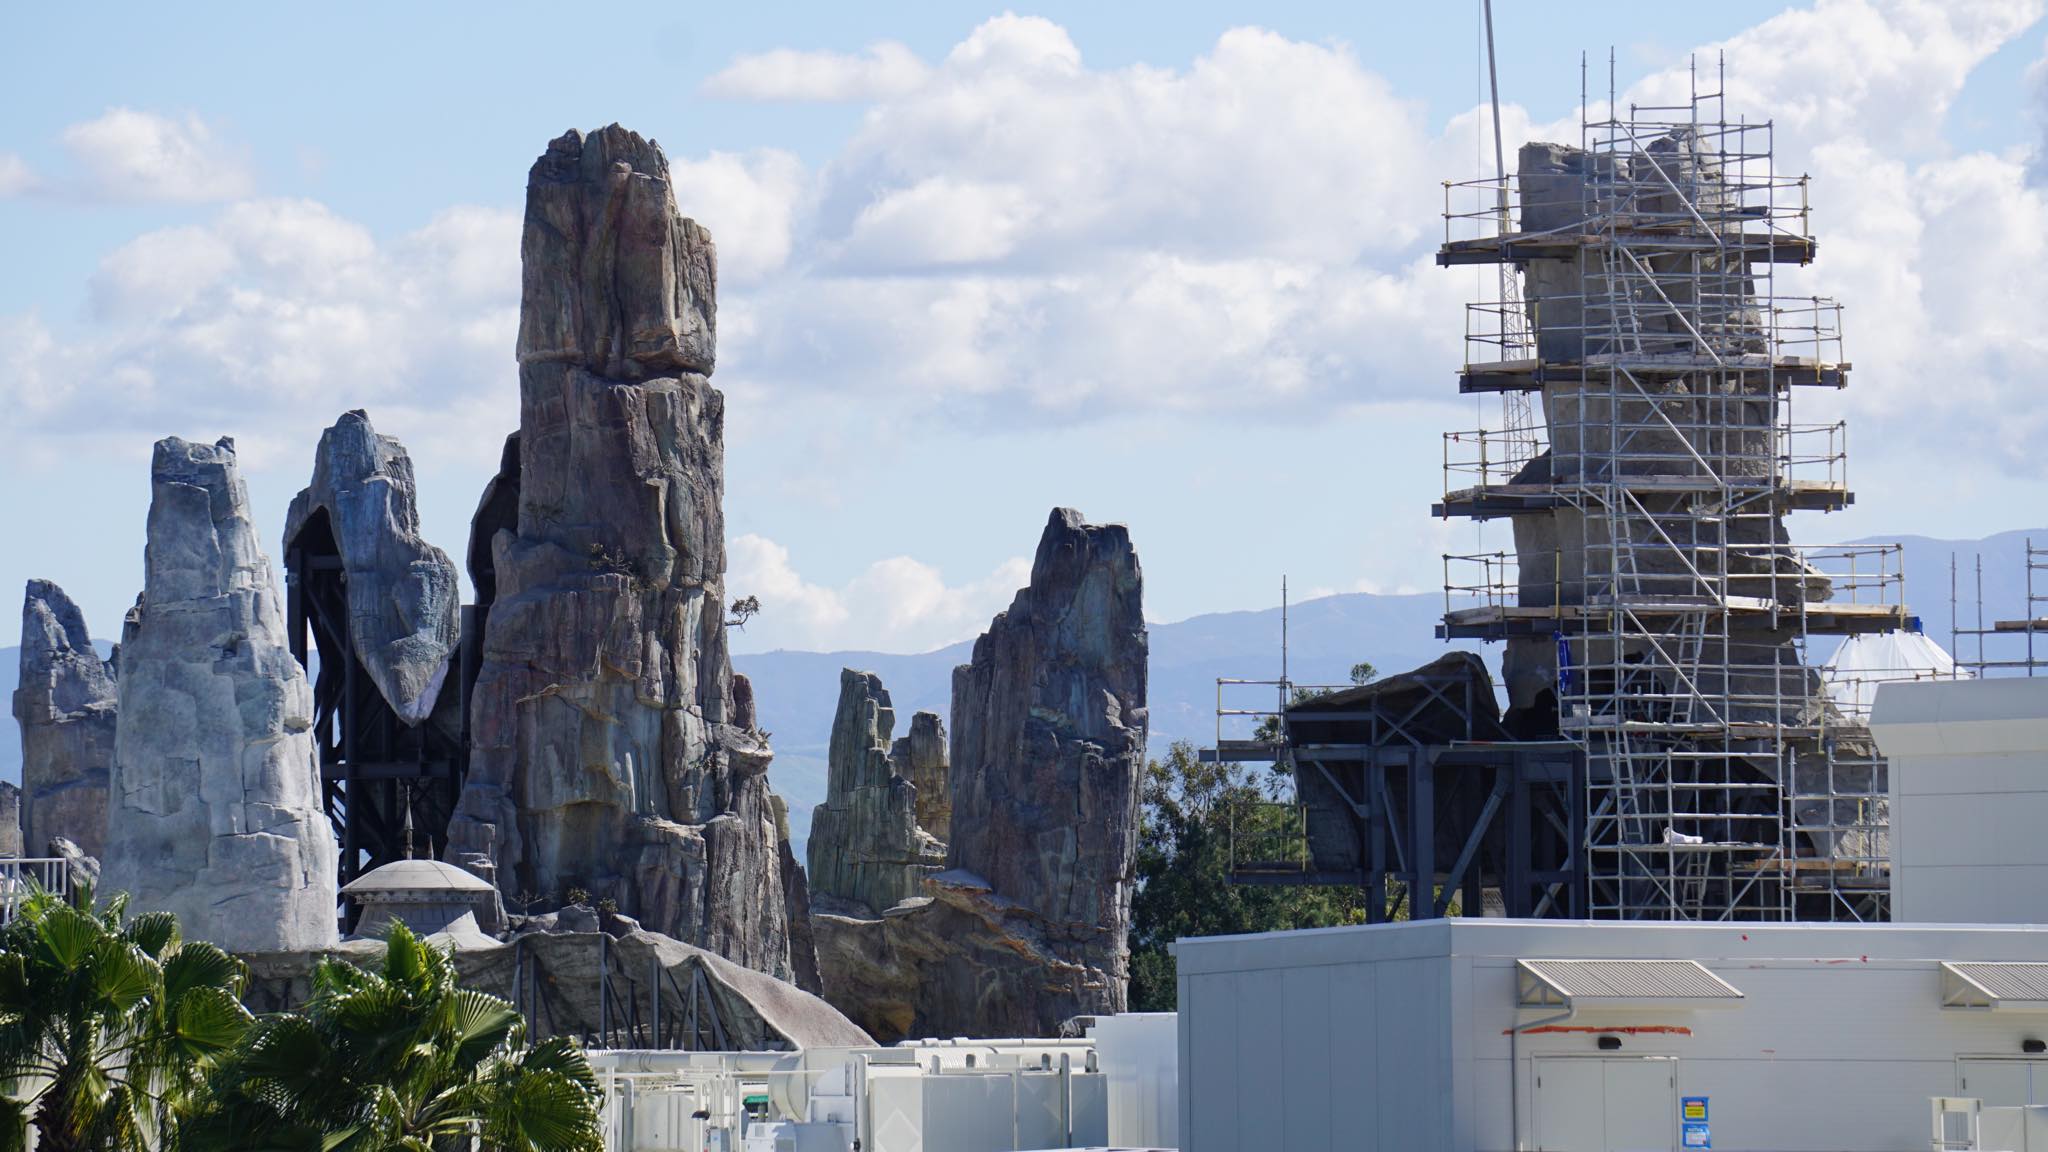 Star Wars: Galaxy’s Edge is Really Starting to Take Shape at Disneyland